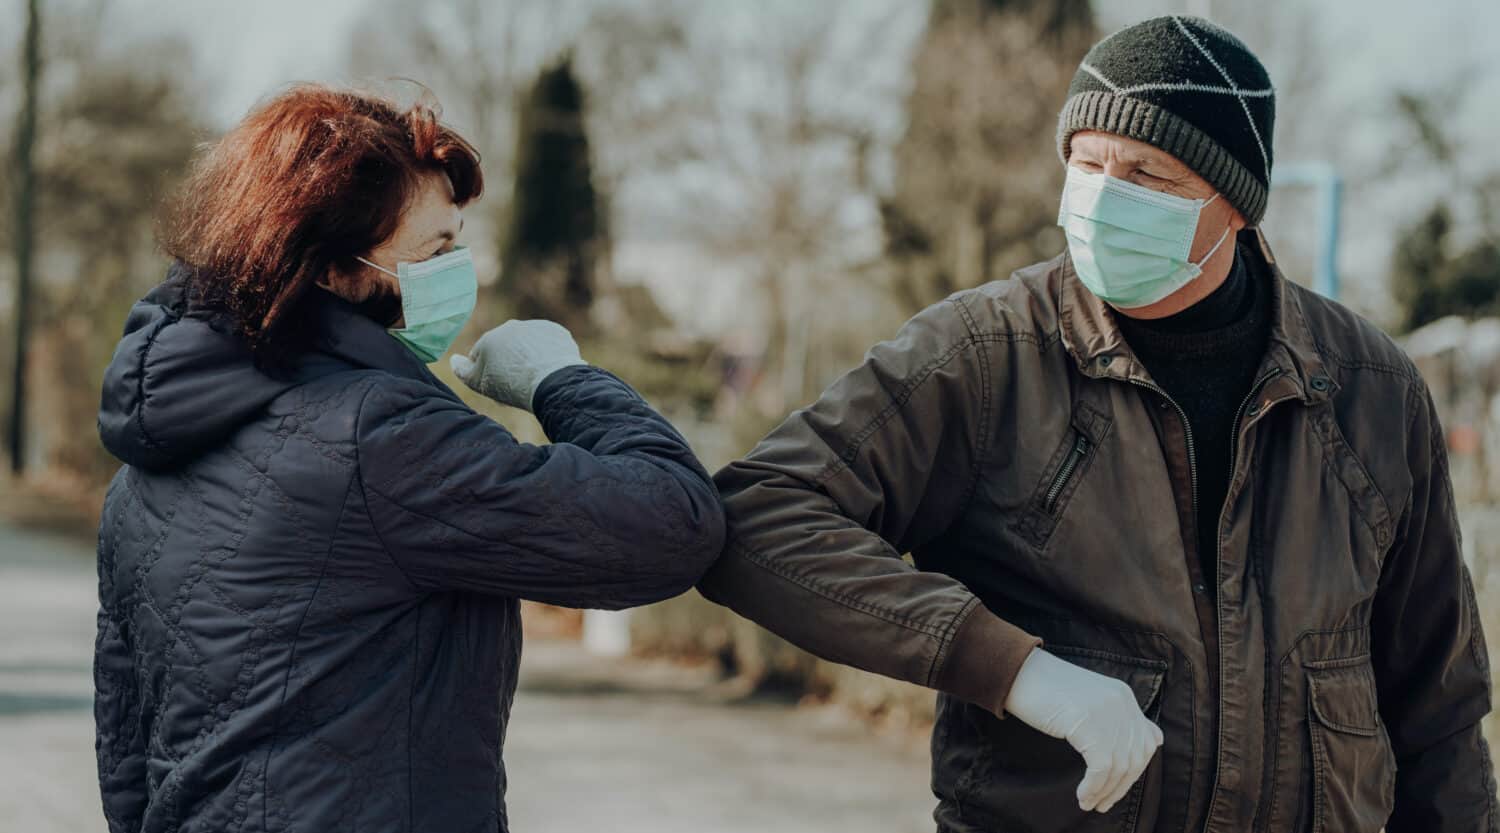 Two people wear face masks and premium hearing aids during the COVID-19 pandemic.